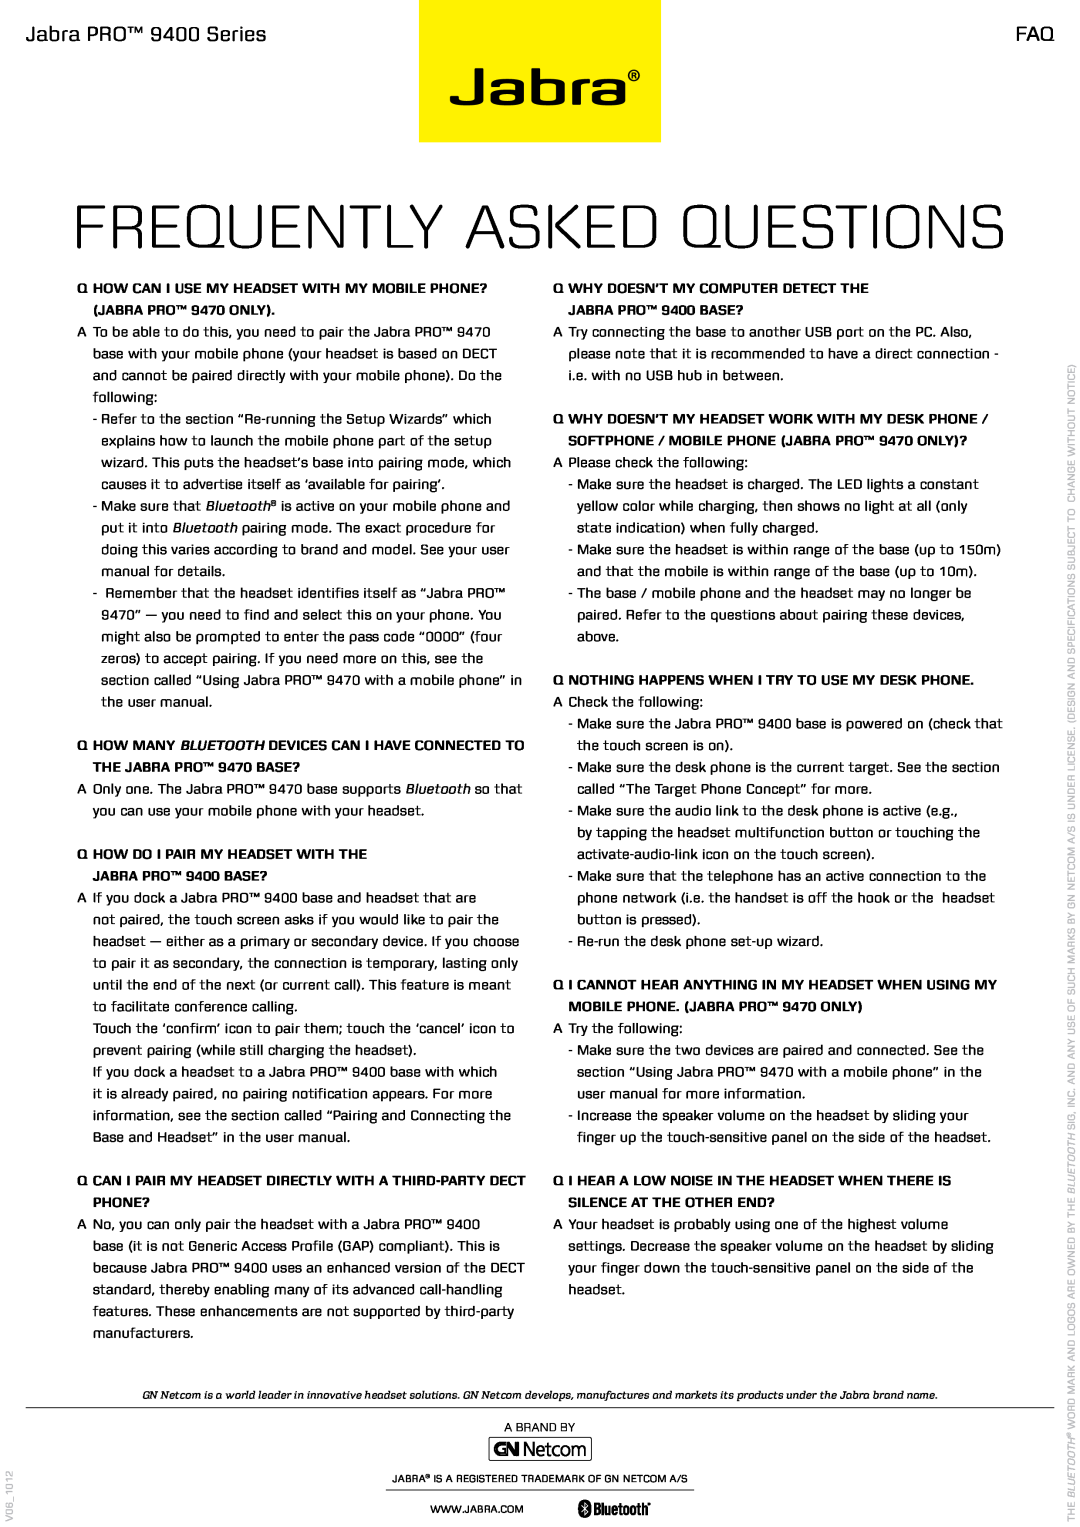 Jabra 9400 user manual Frequently asked questionS, Jabra PROTM, series, STAY IN TOUCH around the office 